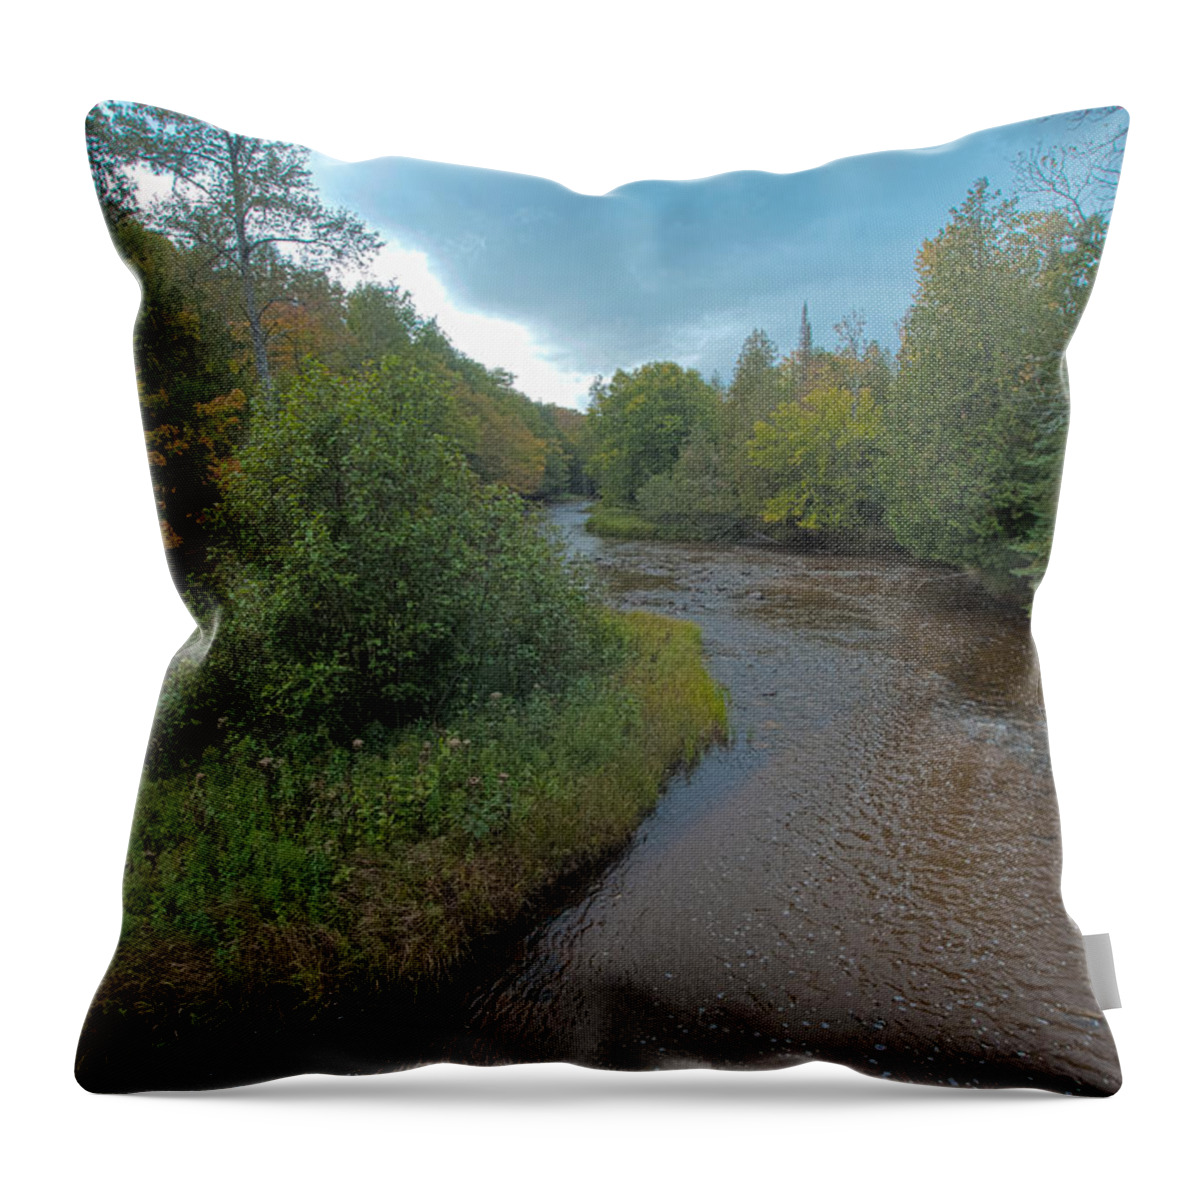 River Throw Pillow featuring the photograph The River by Steven Dunn